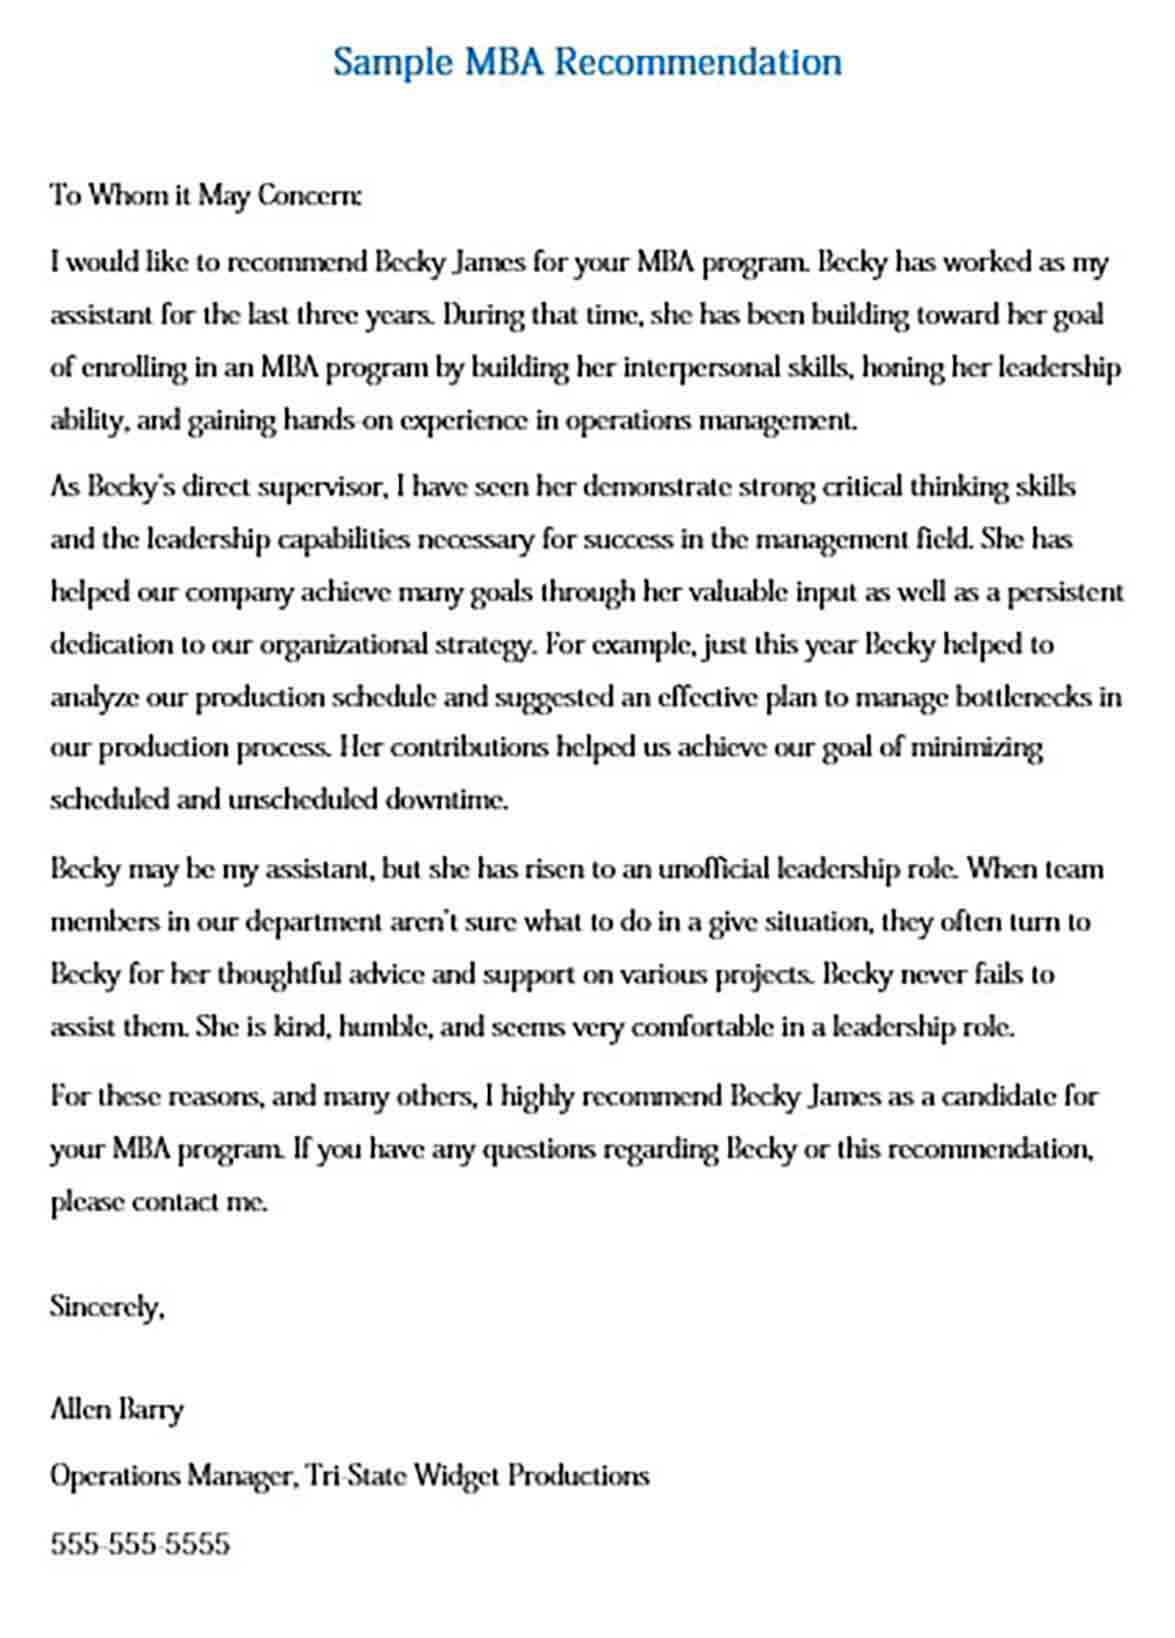 MBA Recommendation letter Example